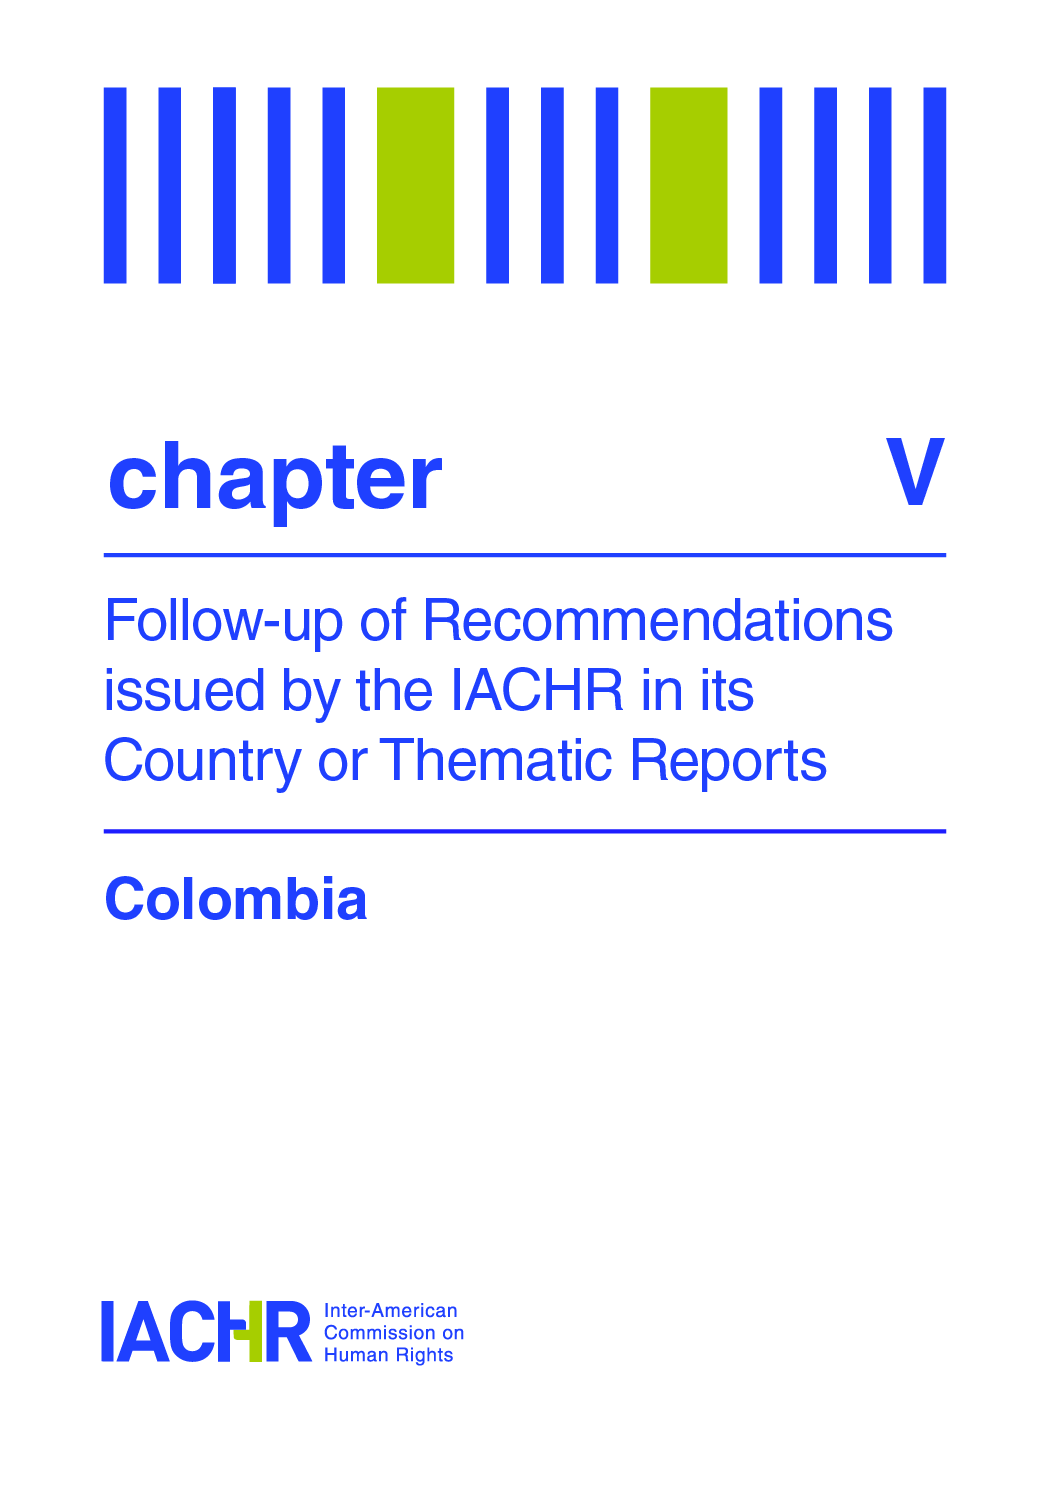 Follow-up of recommendations issued by the IACHR in the reports Truth, Justice, and Reparation: Sixth Report on the Human Rights Situation in Colombia